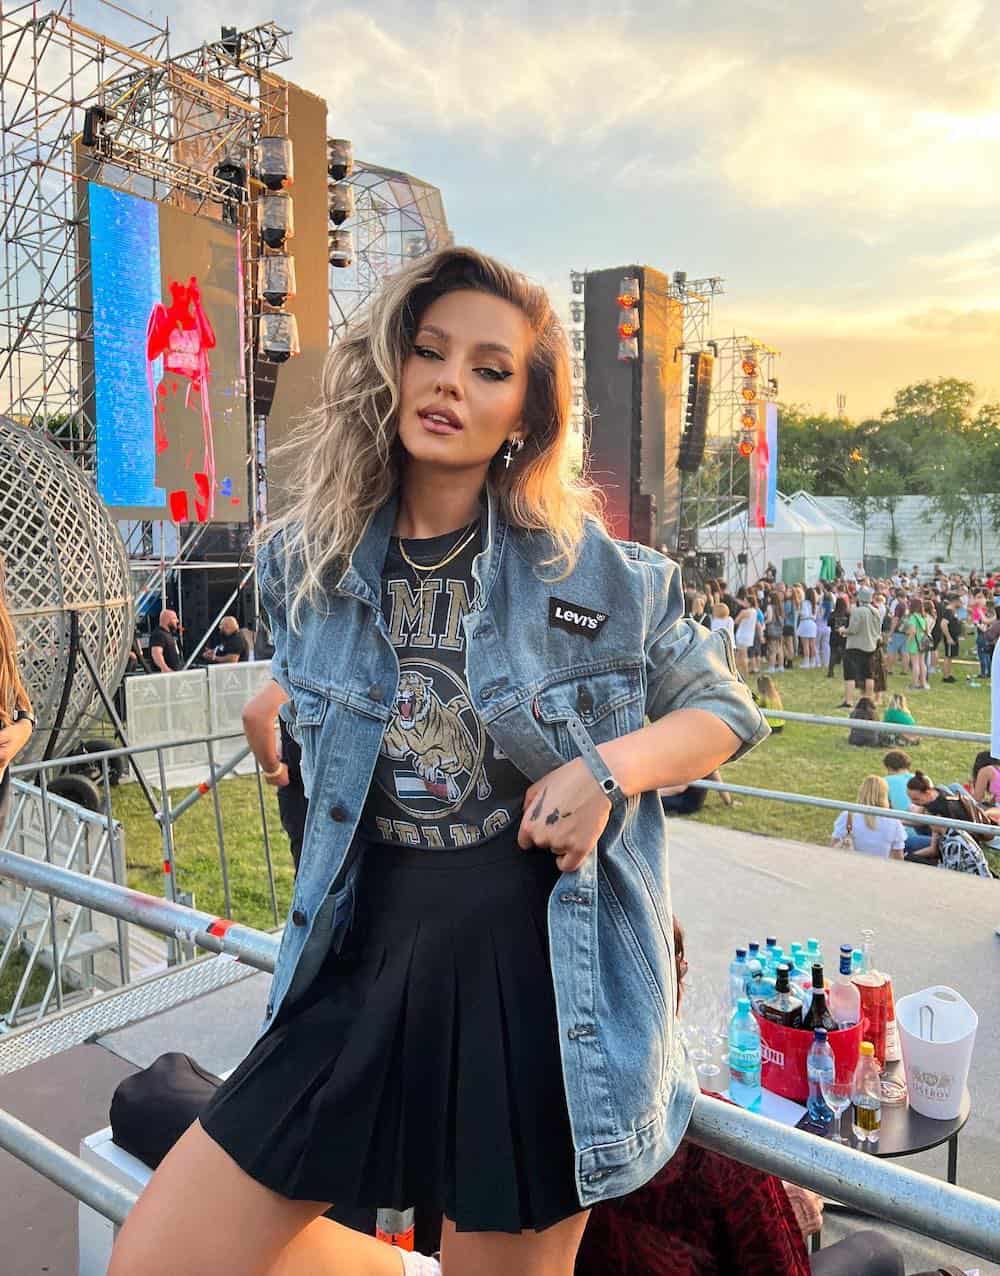 A woman at a concert wearing a black tennis skirt, a black graphic tee, and an oversized denim jacket